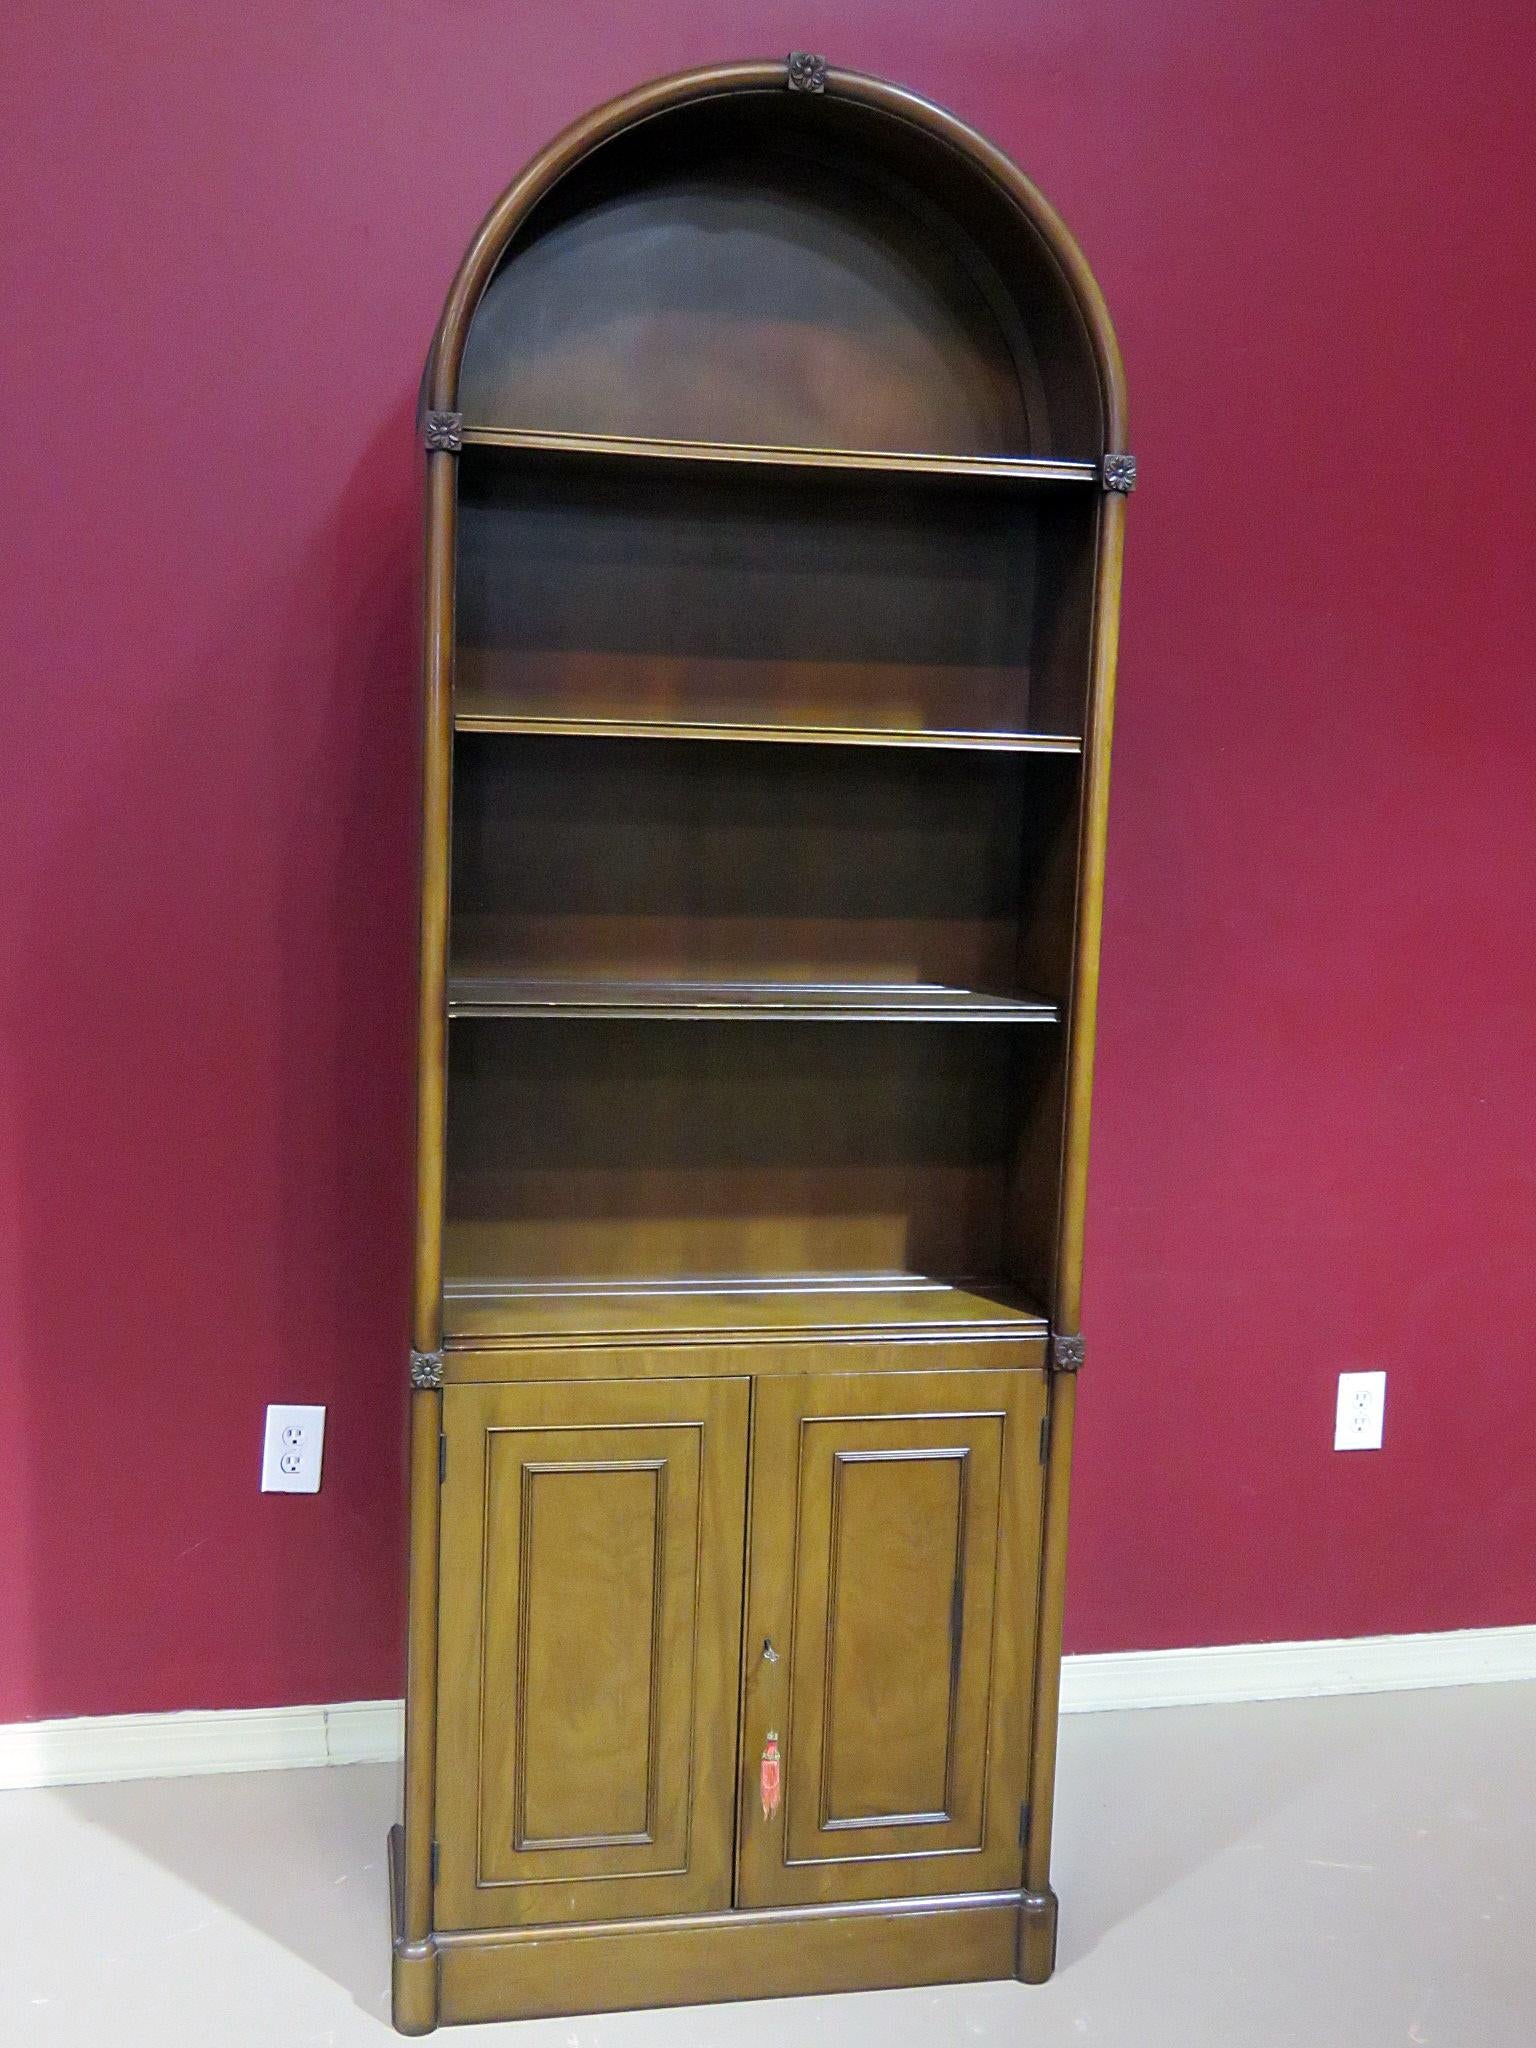 Vintage Beacon Hill Regency style arched mahogany bookcase with 3 shelves over 2 doors.